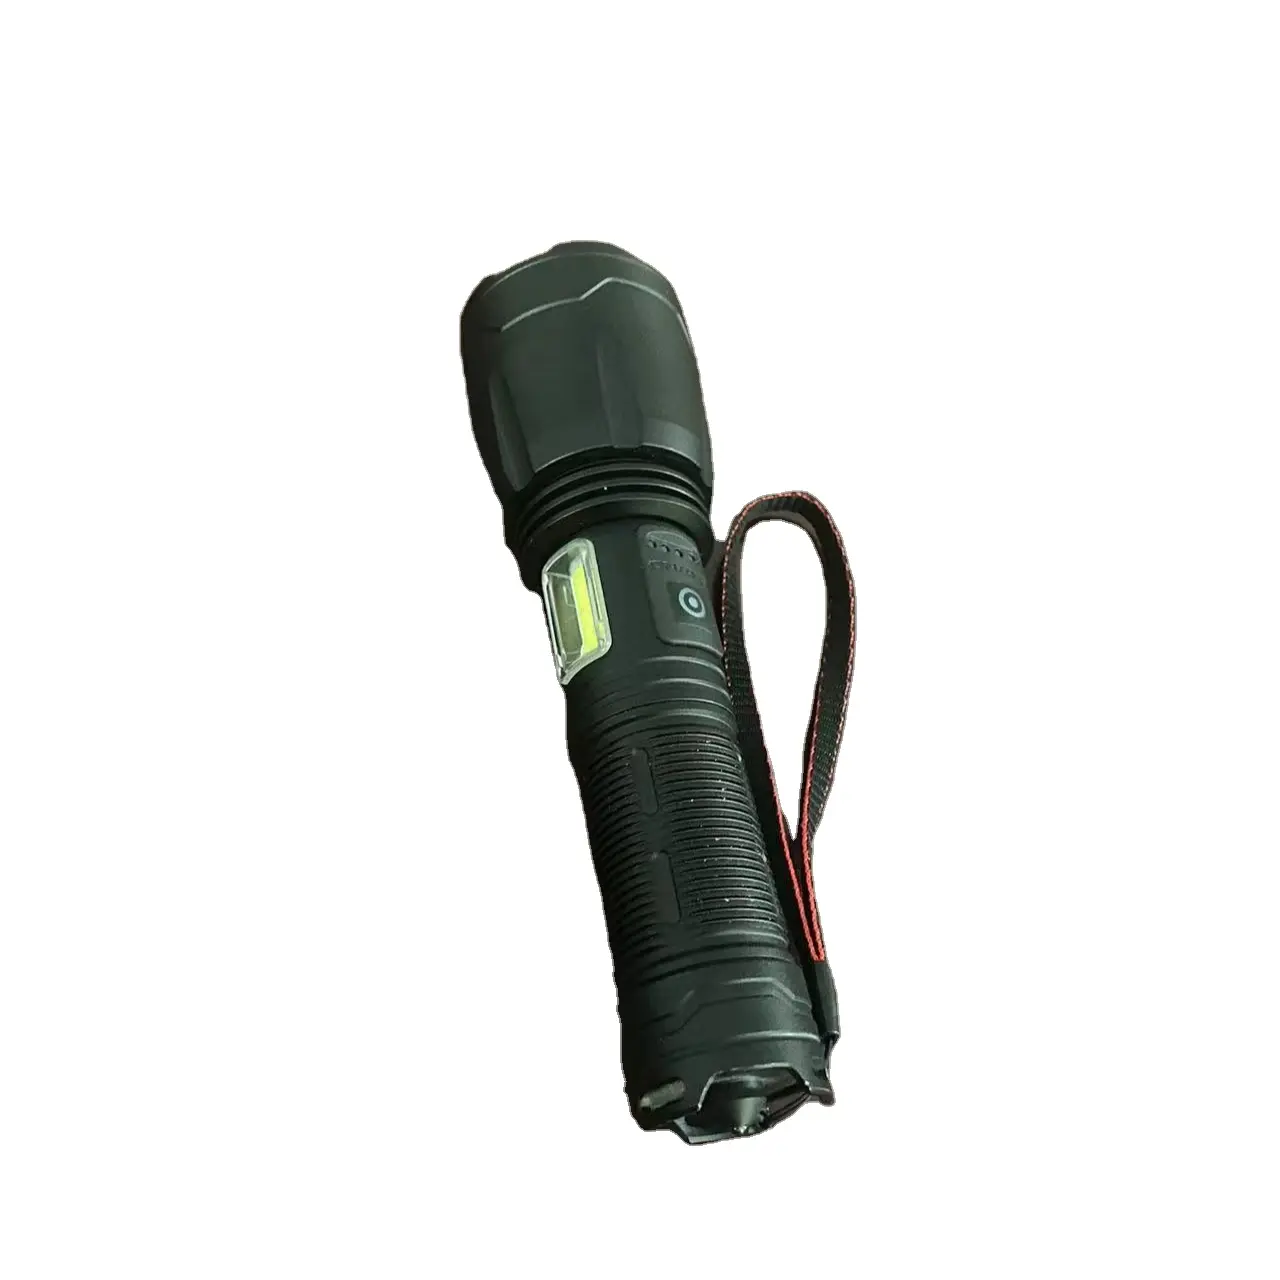 Super Bright High Power 26650 torch led Torchlight Rechargeable Tactical Led Flashlight